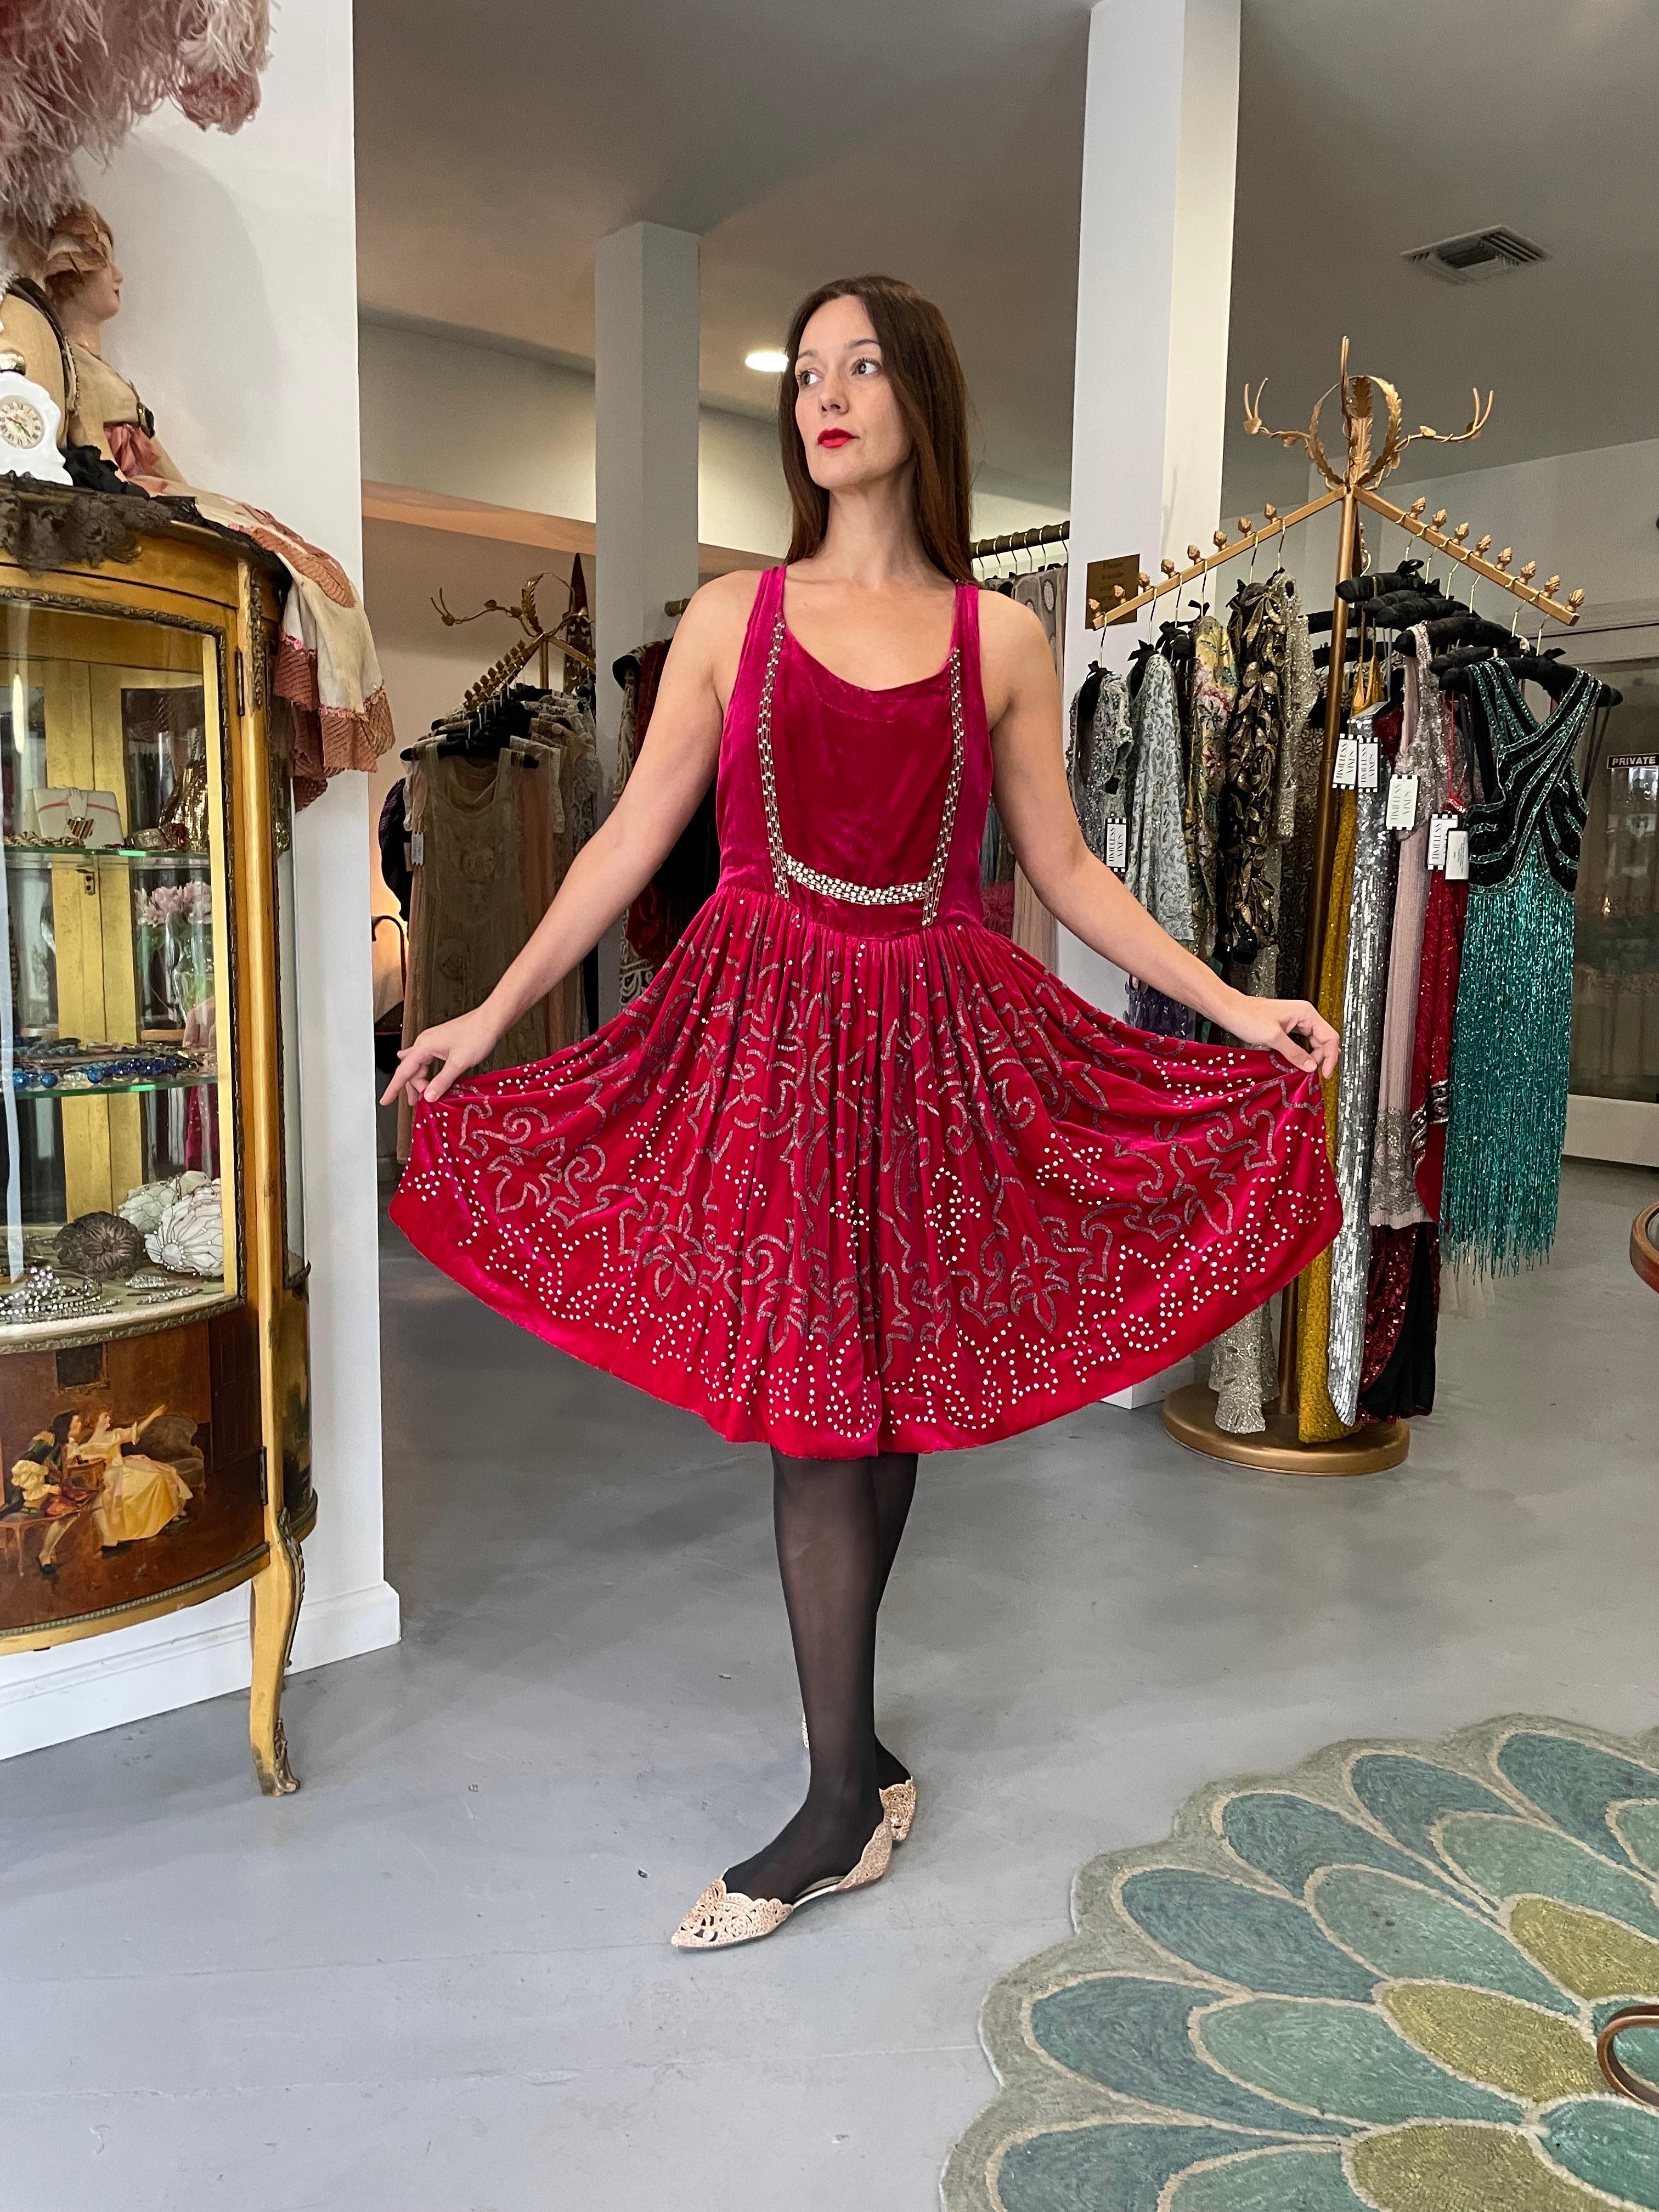 A simply stunning and seldom found magenta pink heavily beaded silk-velvet dance dress dating back to the mid-1920's. Vibrant colored flapper dresses from this decade are perennial favorites and this one is a show-stopper. The garment's simple